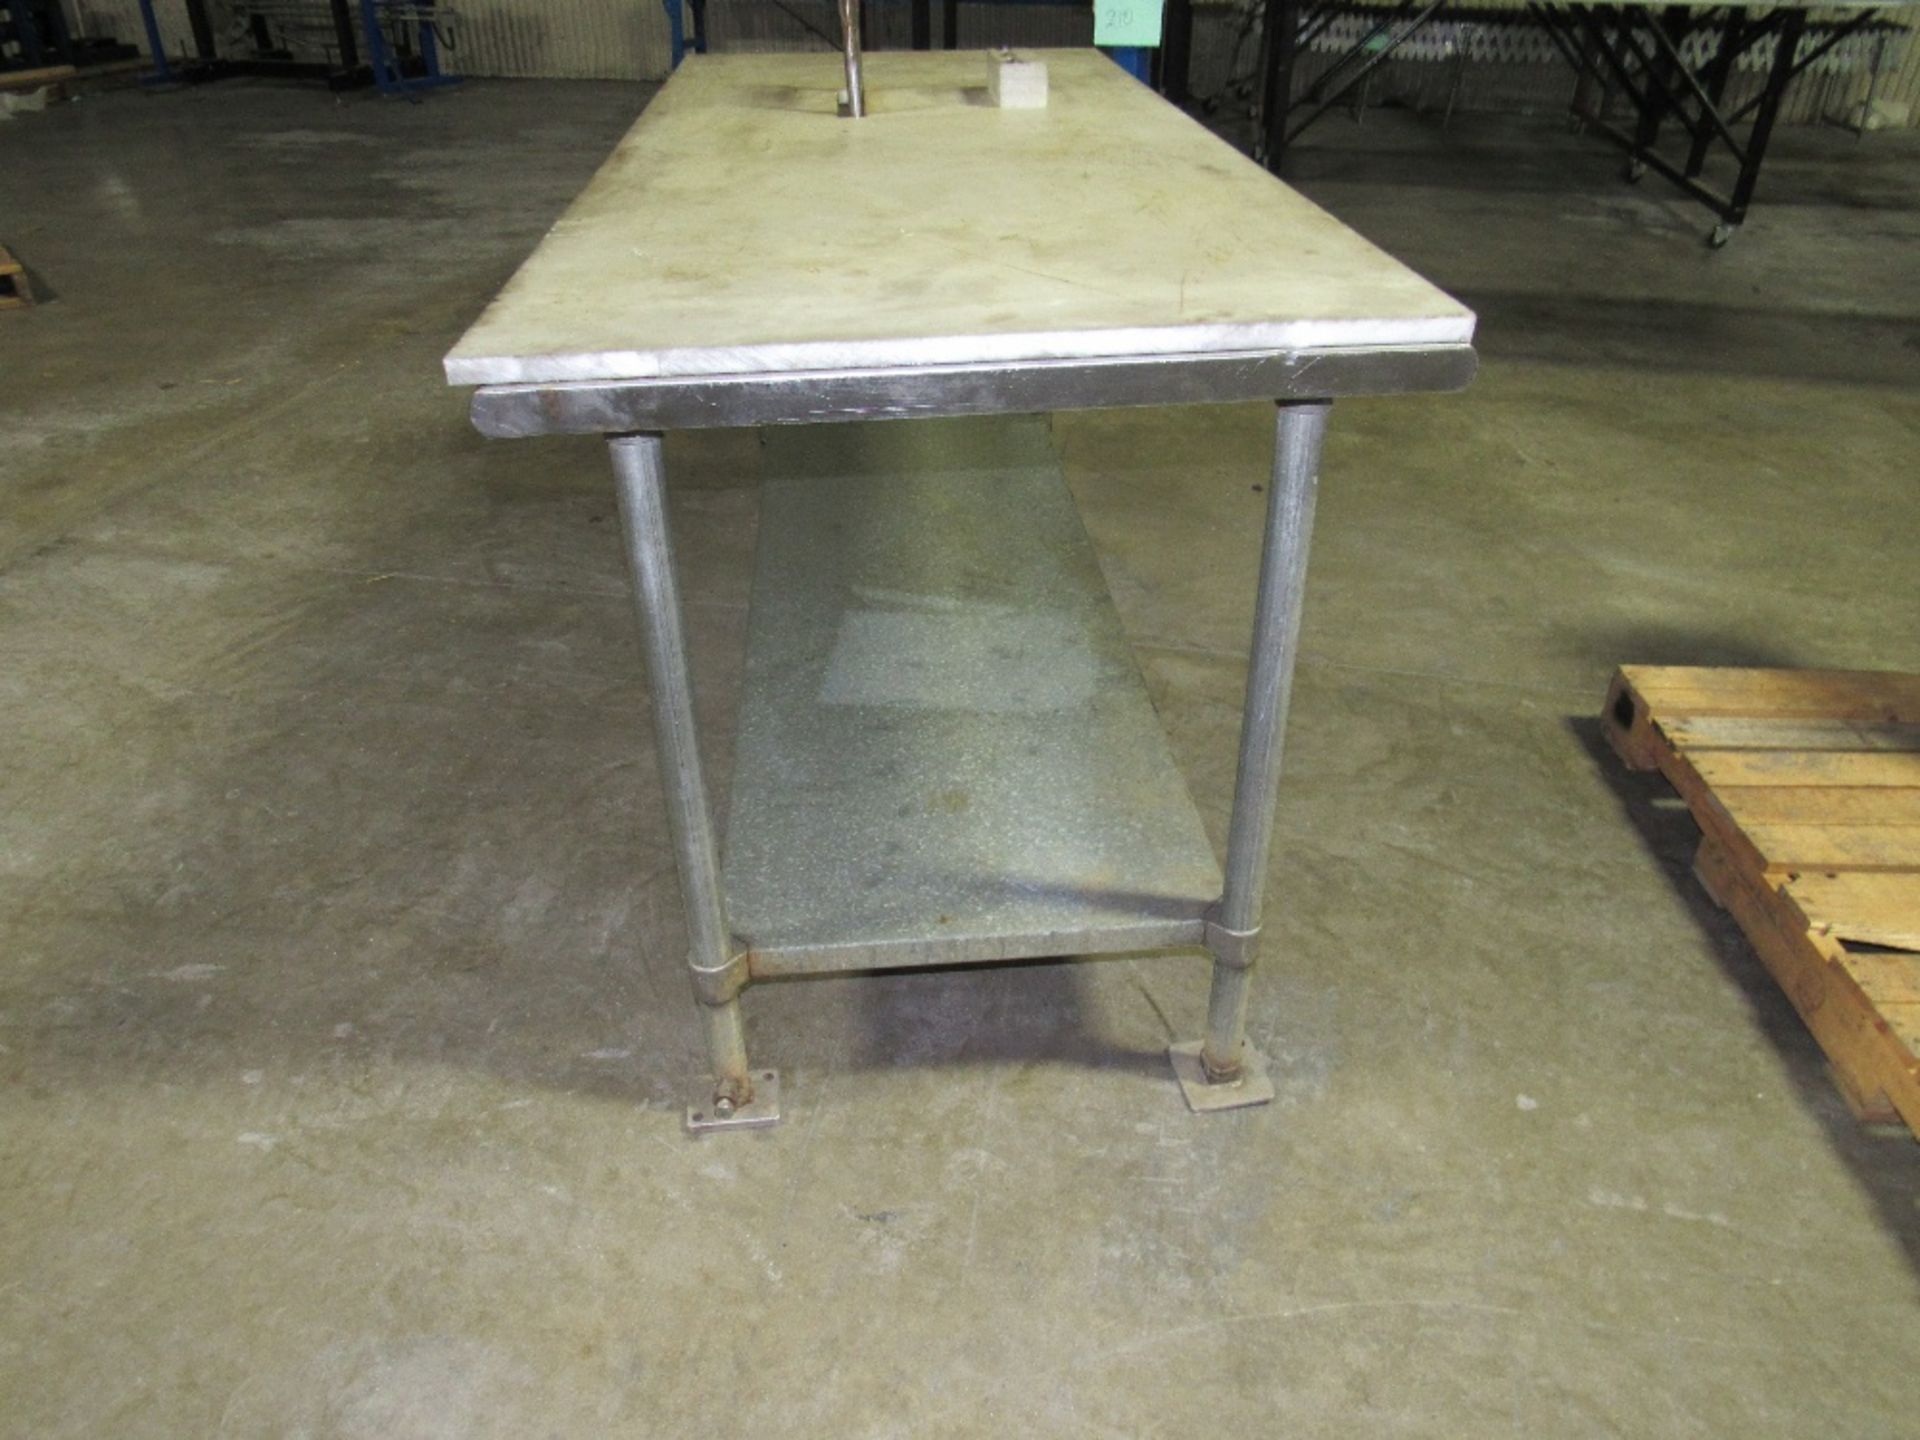 Stainless Steel Table with Teflon removable Plate Cover - Galvanized second surface -- (RIGGING - Image 7 of 14